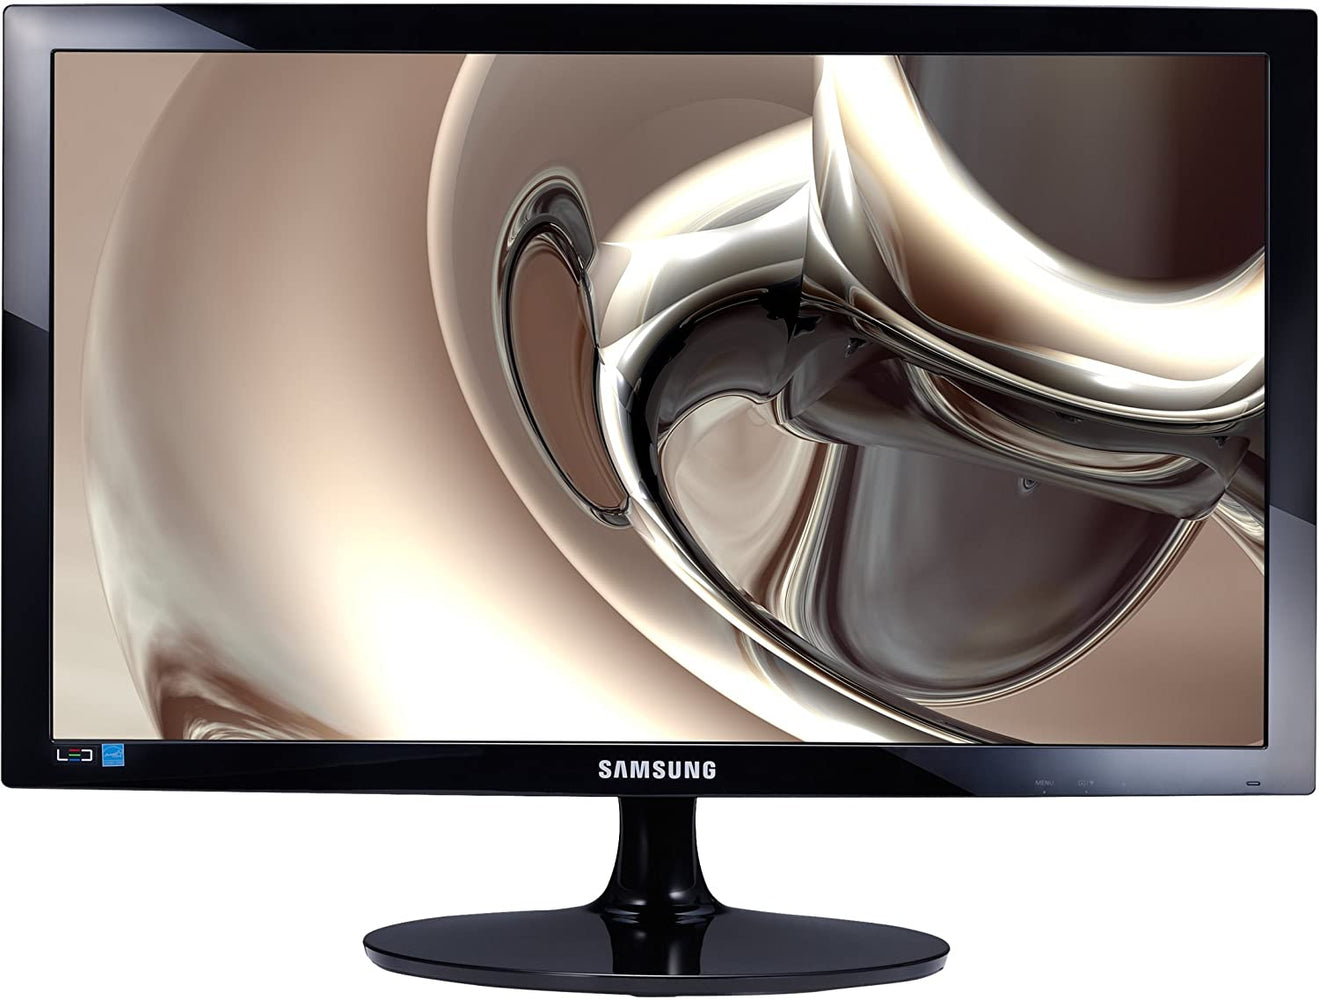 Samsung Simple LED 21.5” Monitor with High Glossy Finish (S22D300NY) - We Love tec